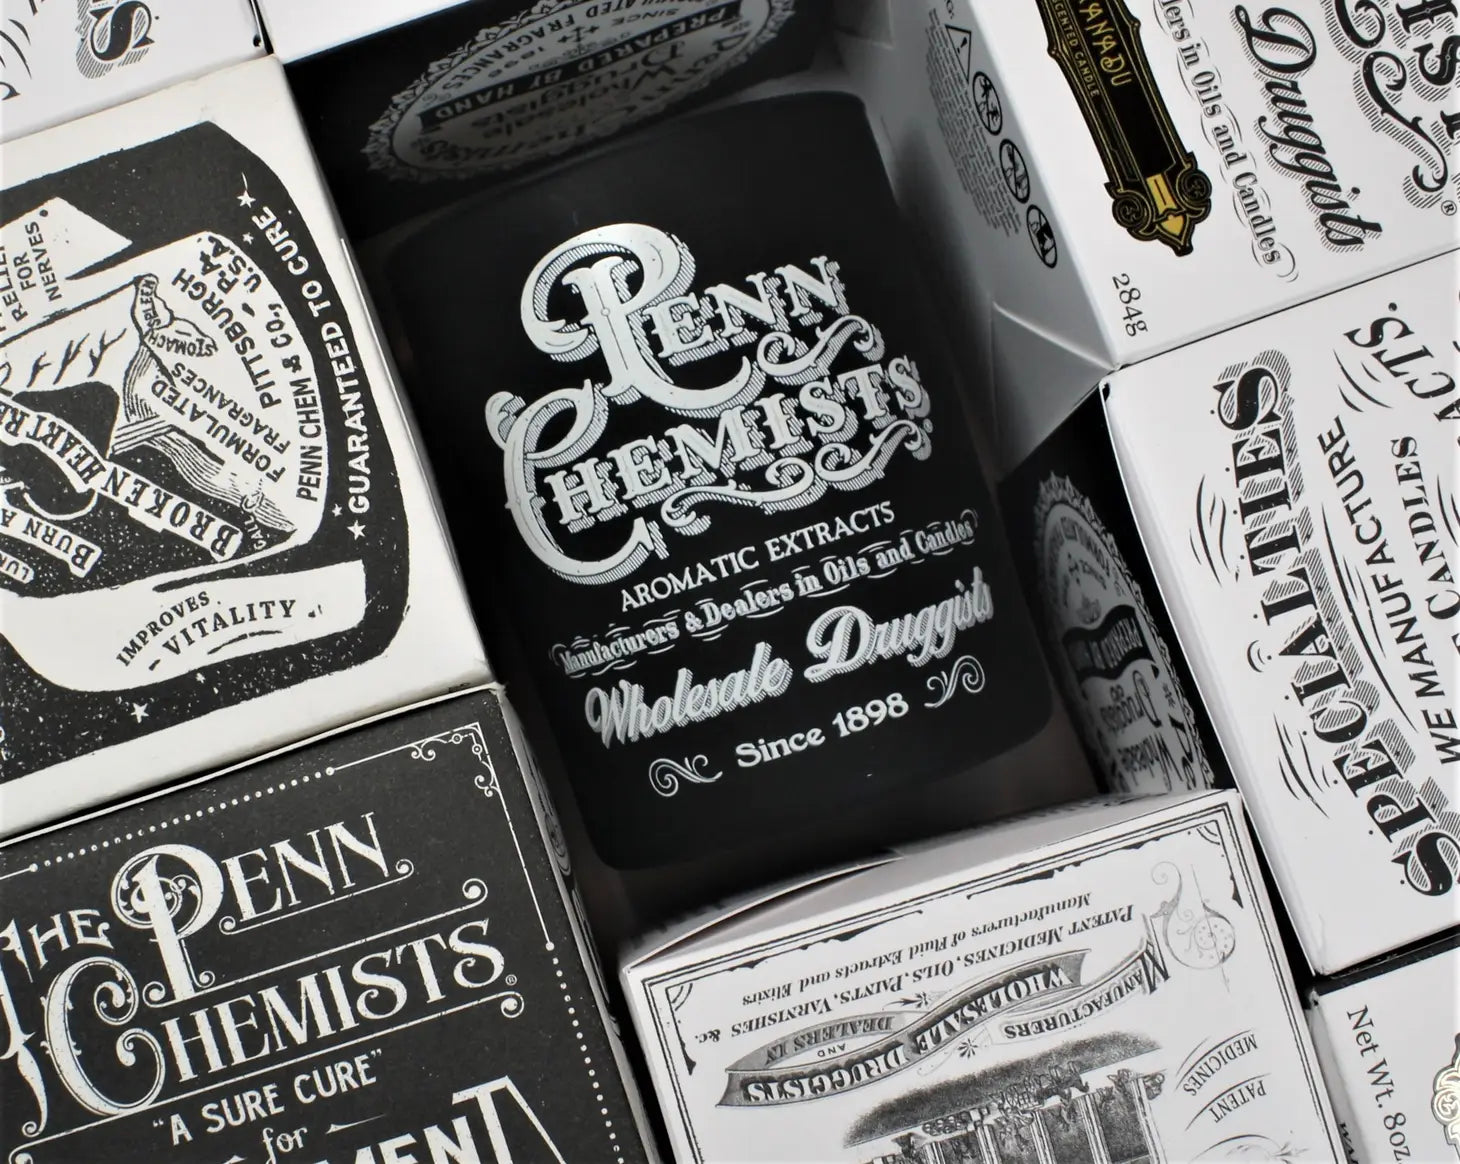 Penn Chemists Candles | The Real McCoy {Limited Edition}